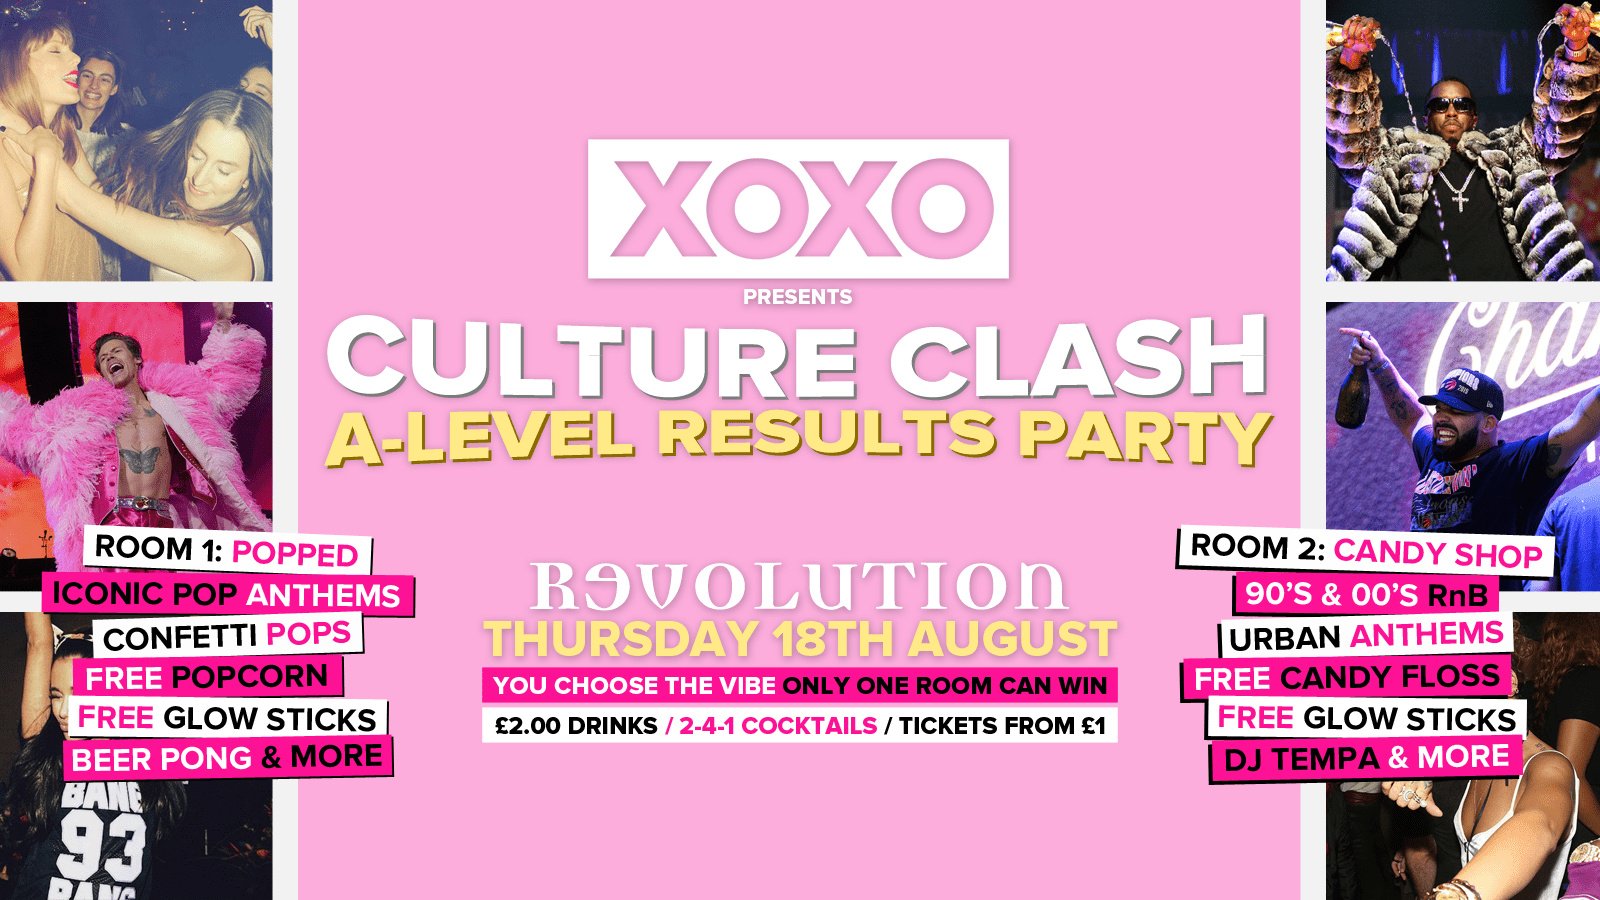 A-Level Results • Culture Clash • £2.00 Drinks • Revolution